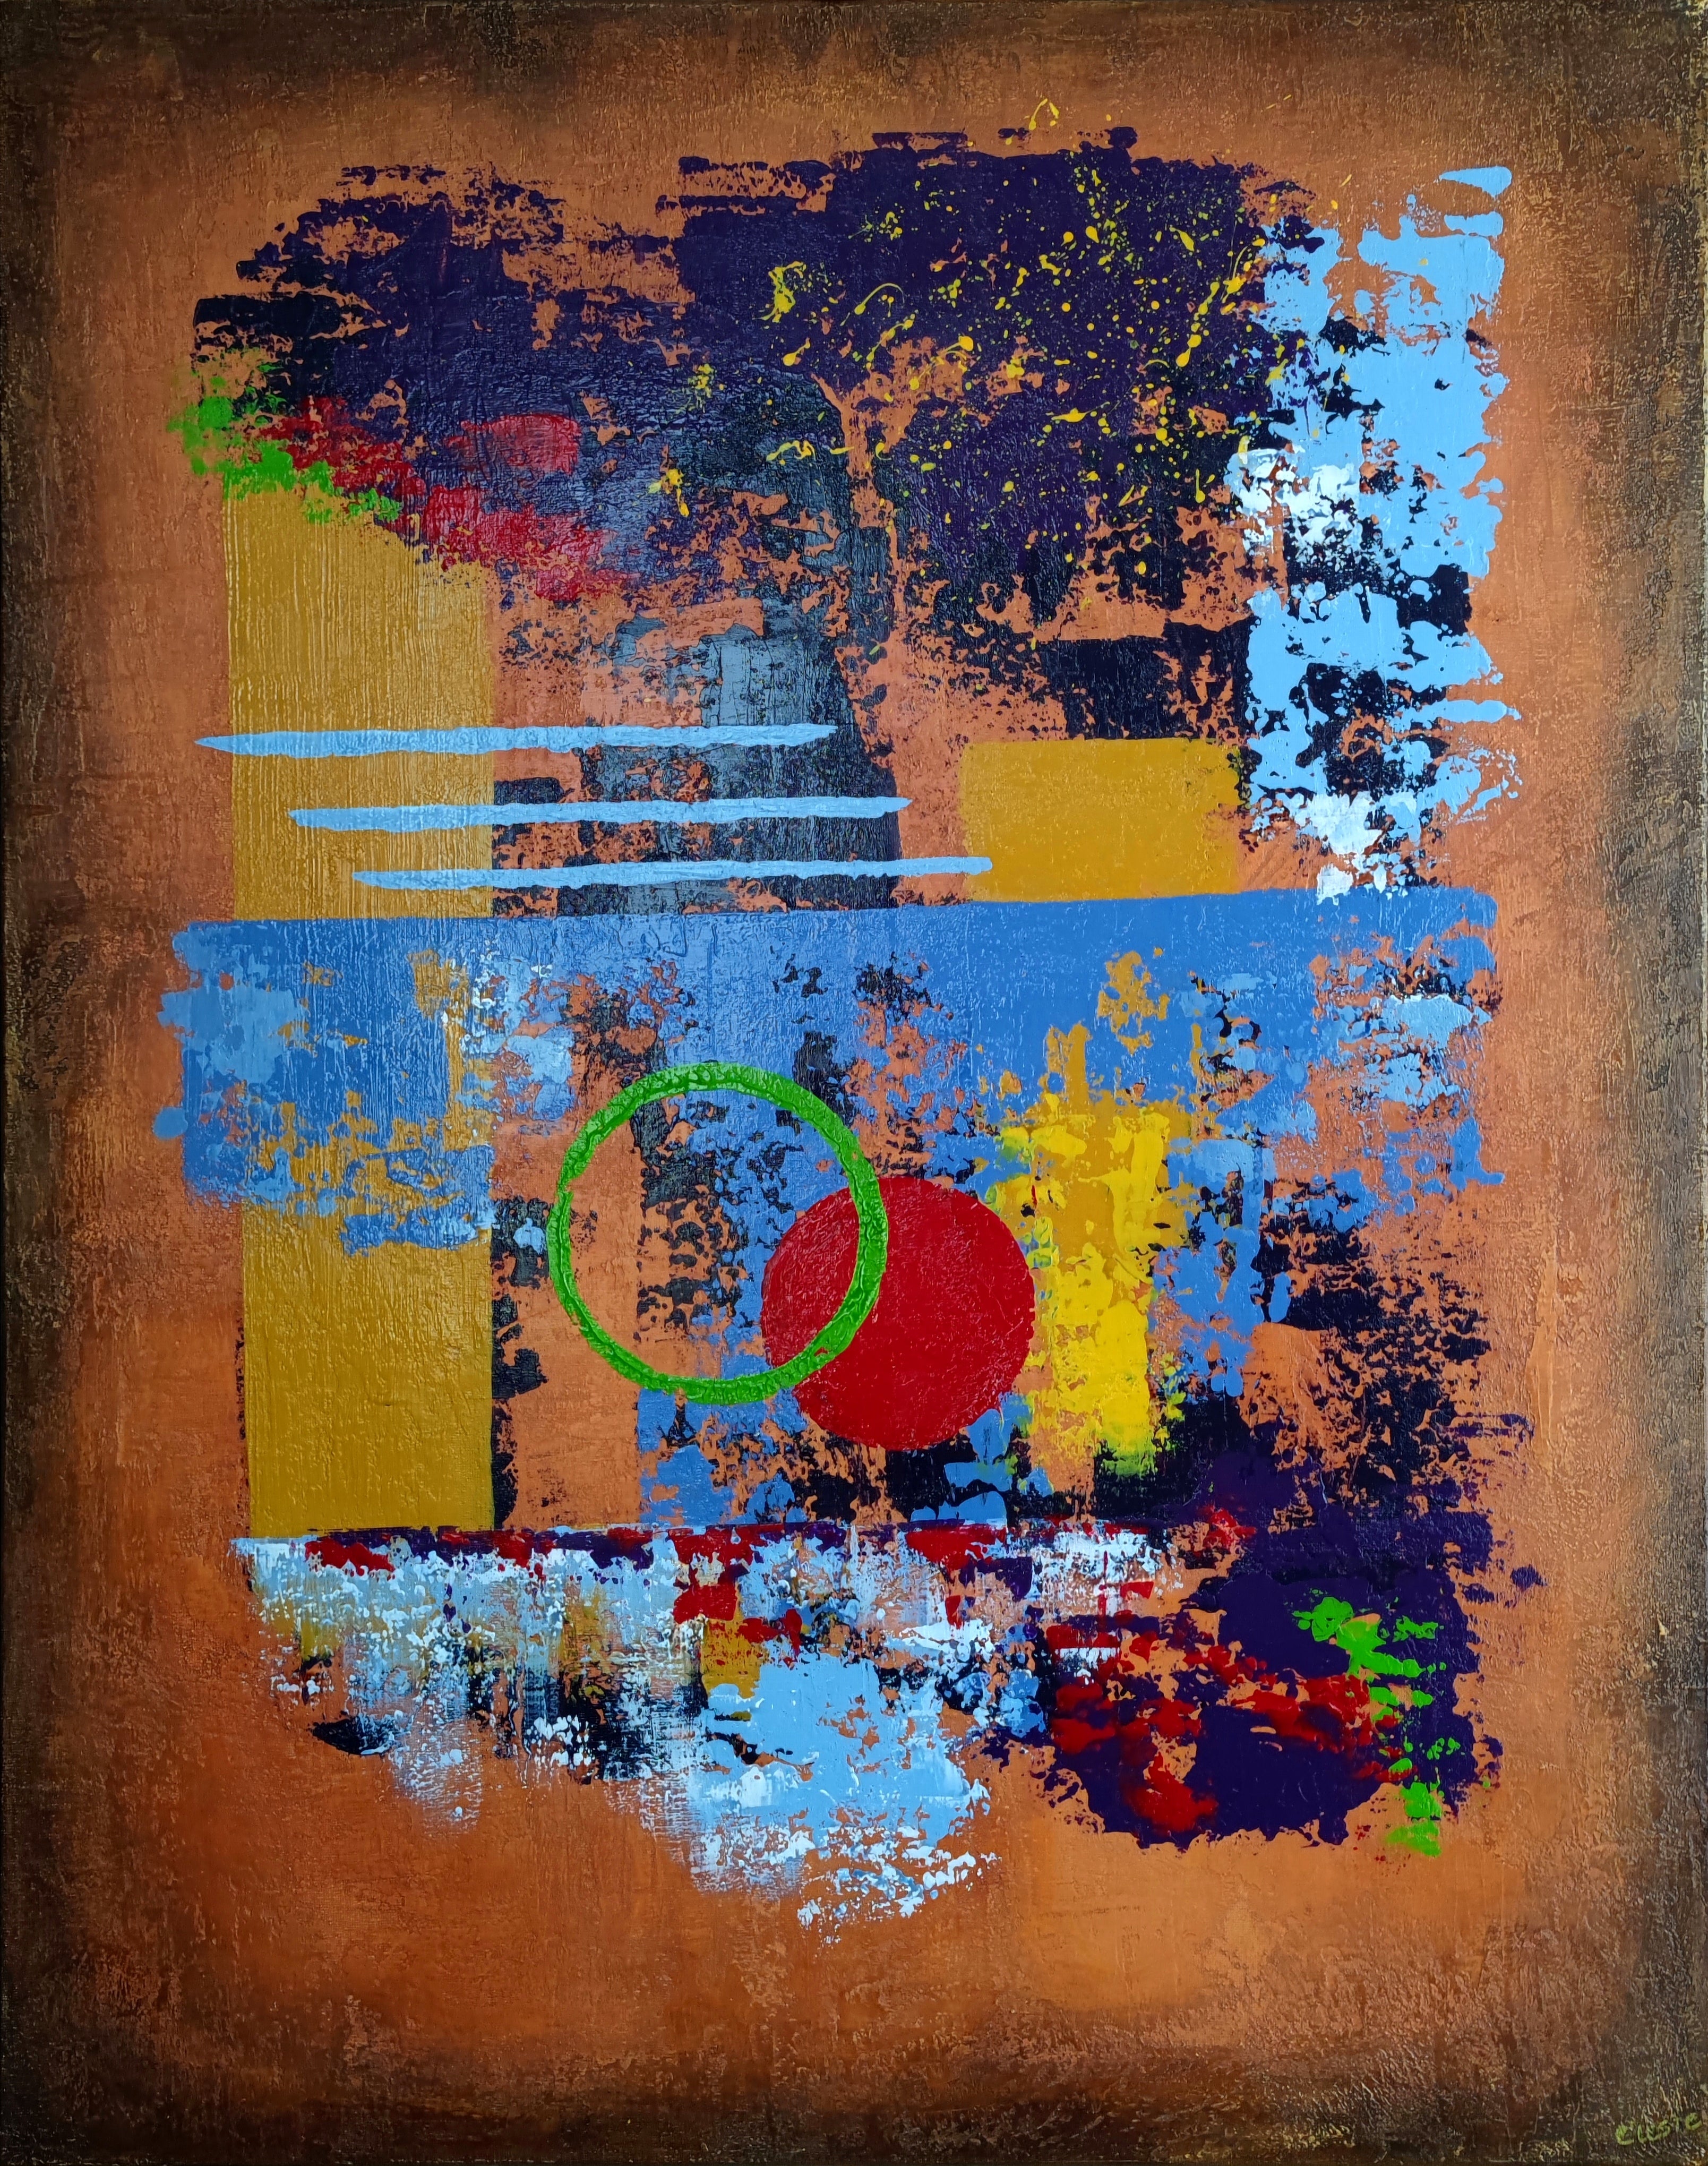 <strong> 'Plums in Chocolate' </strong><br><small><i> Abstract acrylic on canvas </i></small>